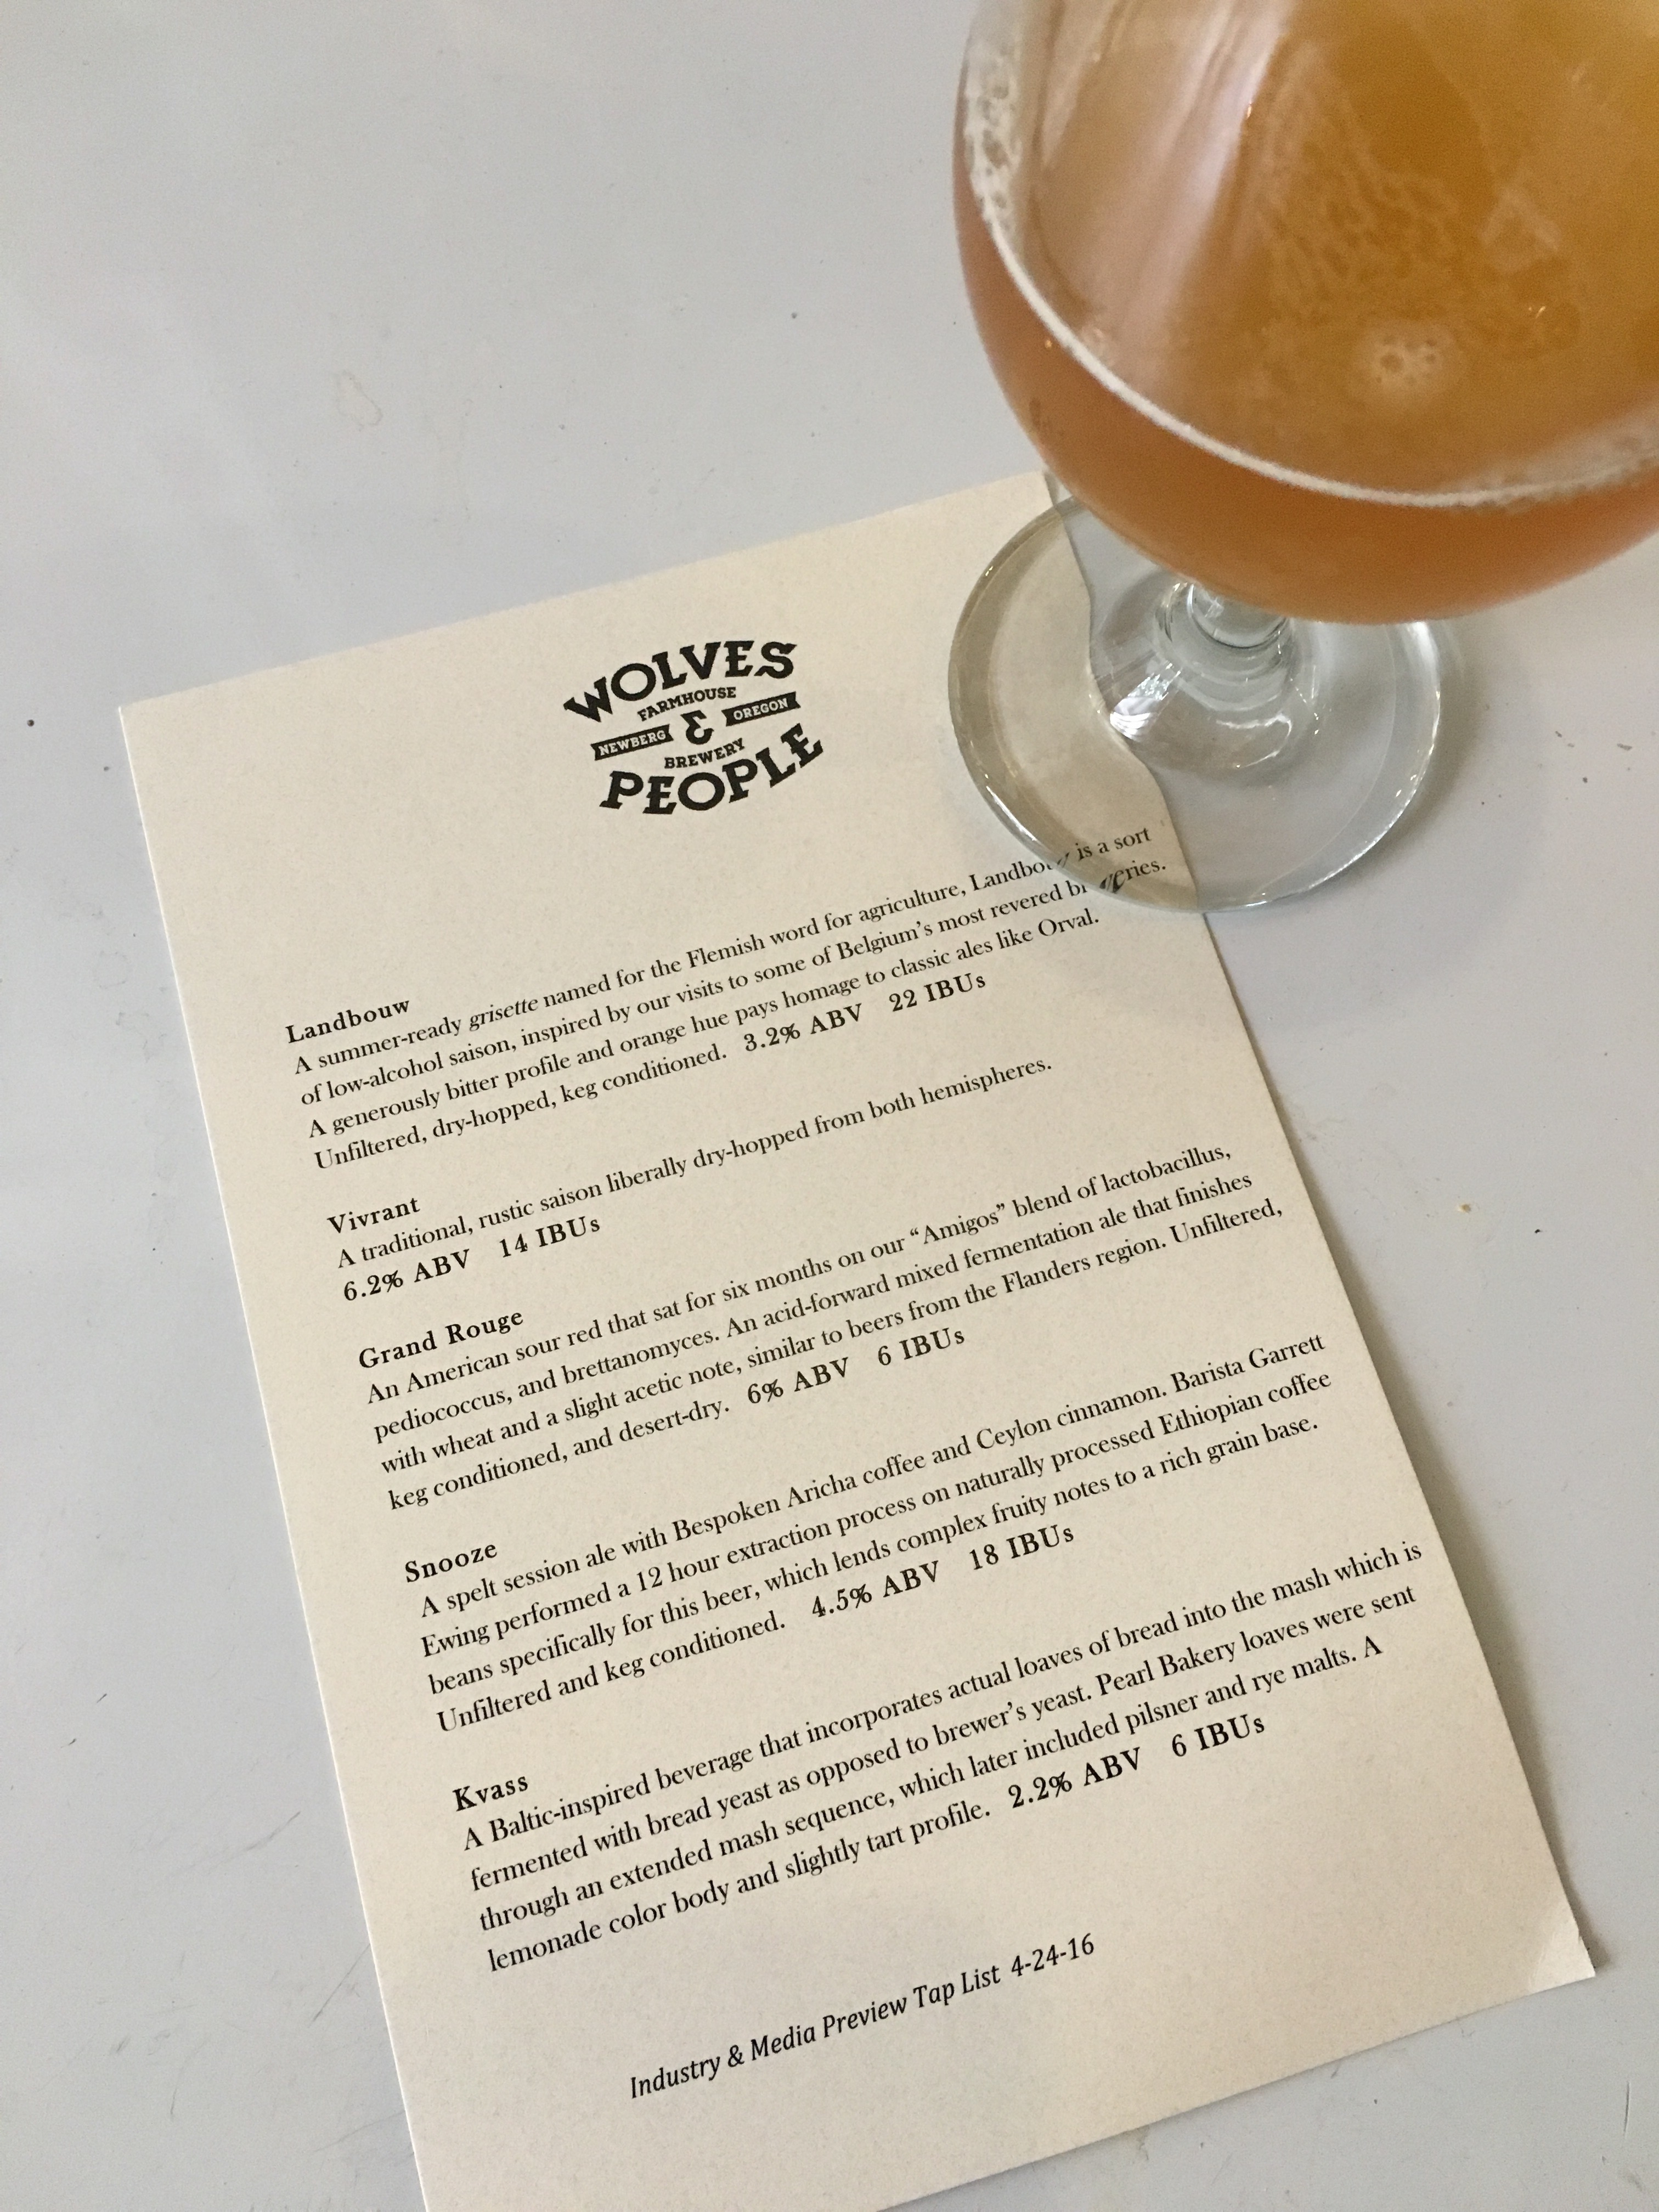 Beer menu during a family, friends and industry preview at Wolves & People Farmhouse Brewery.